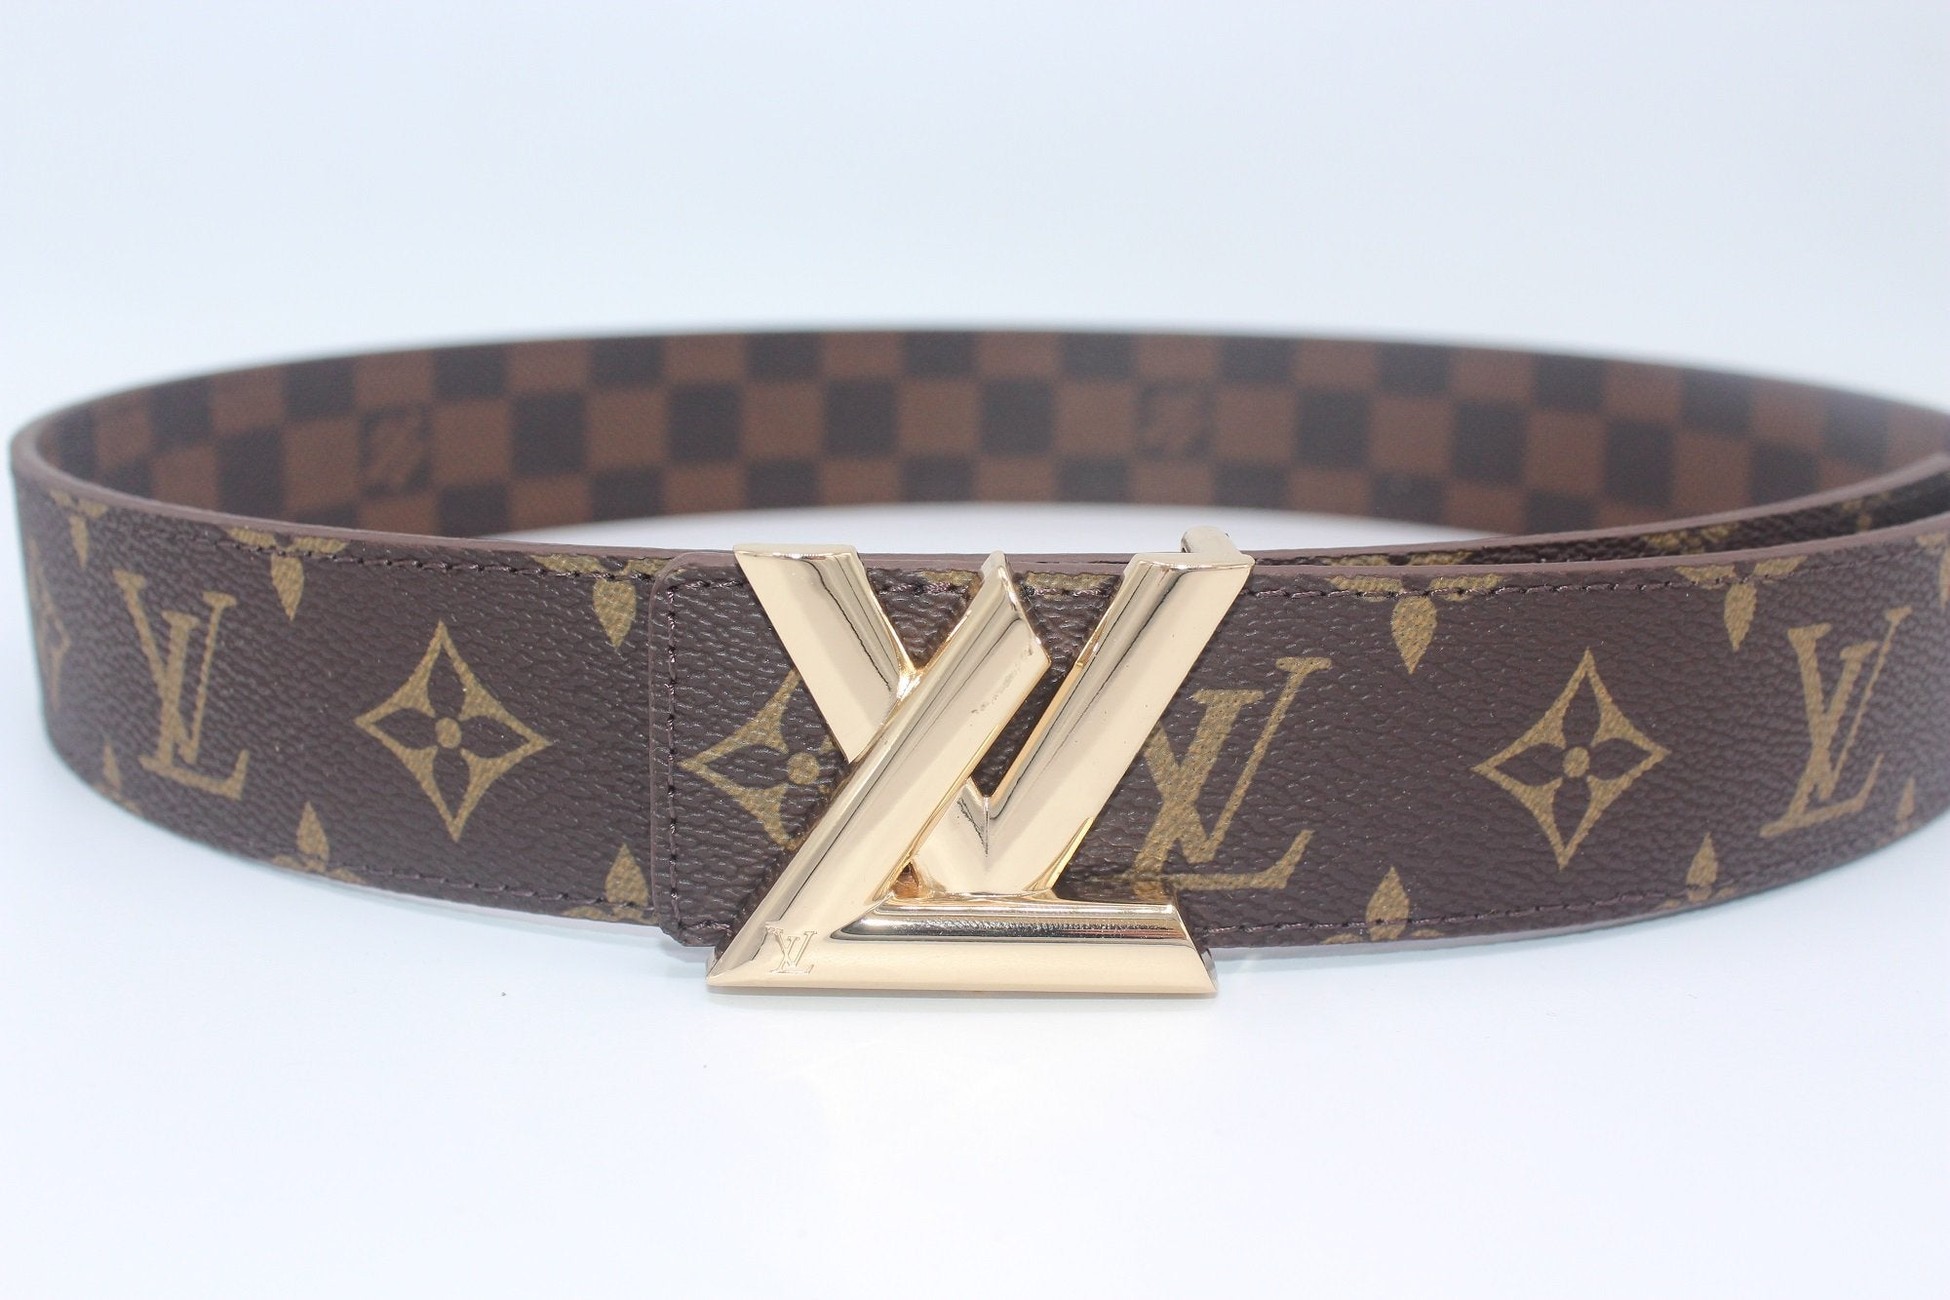 Two sided Louis Vuitton belt